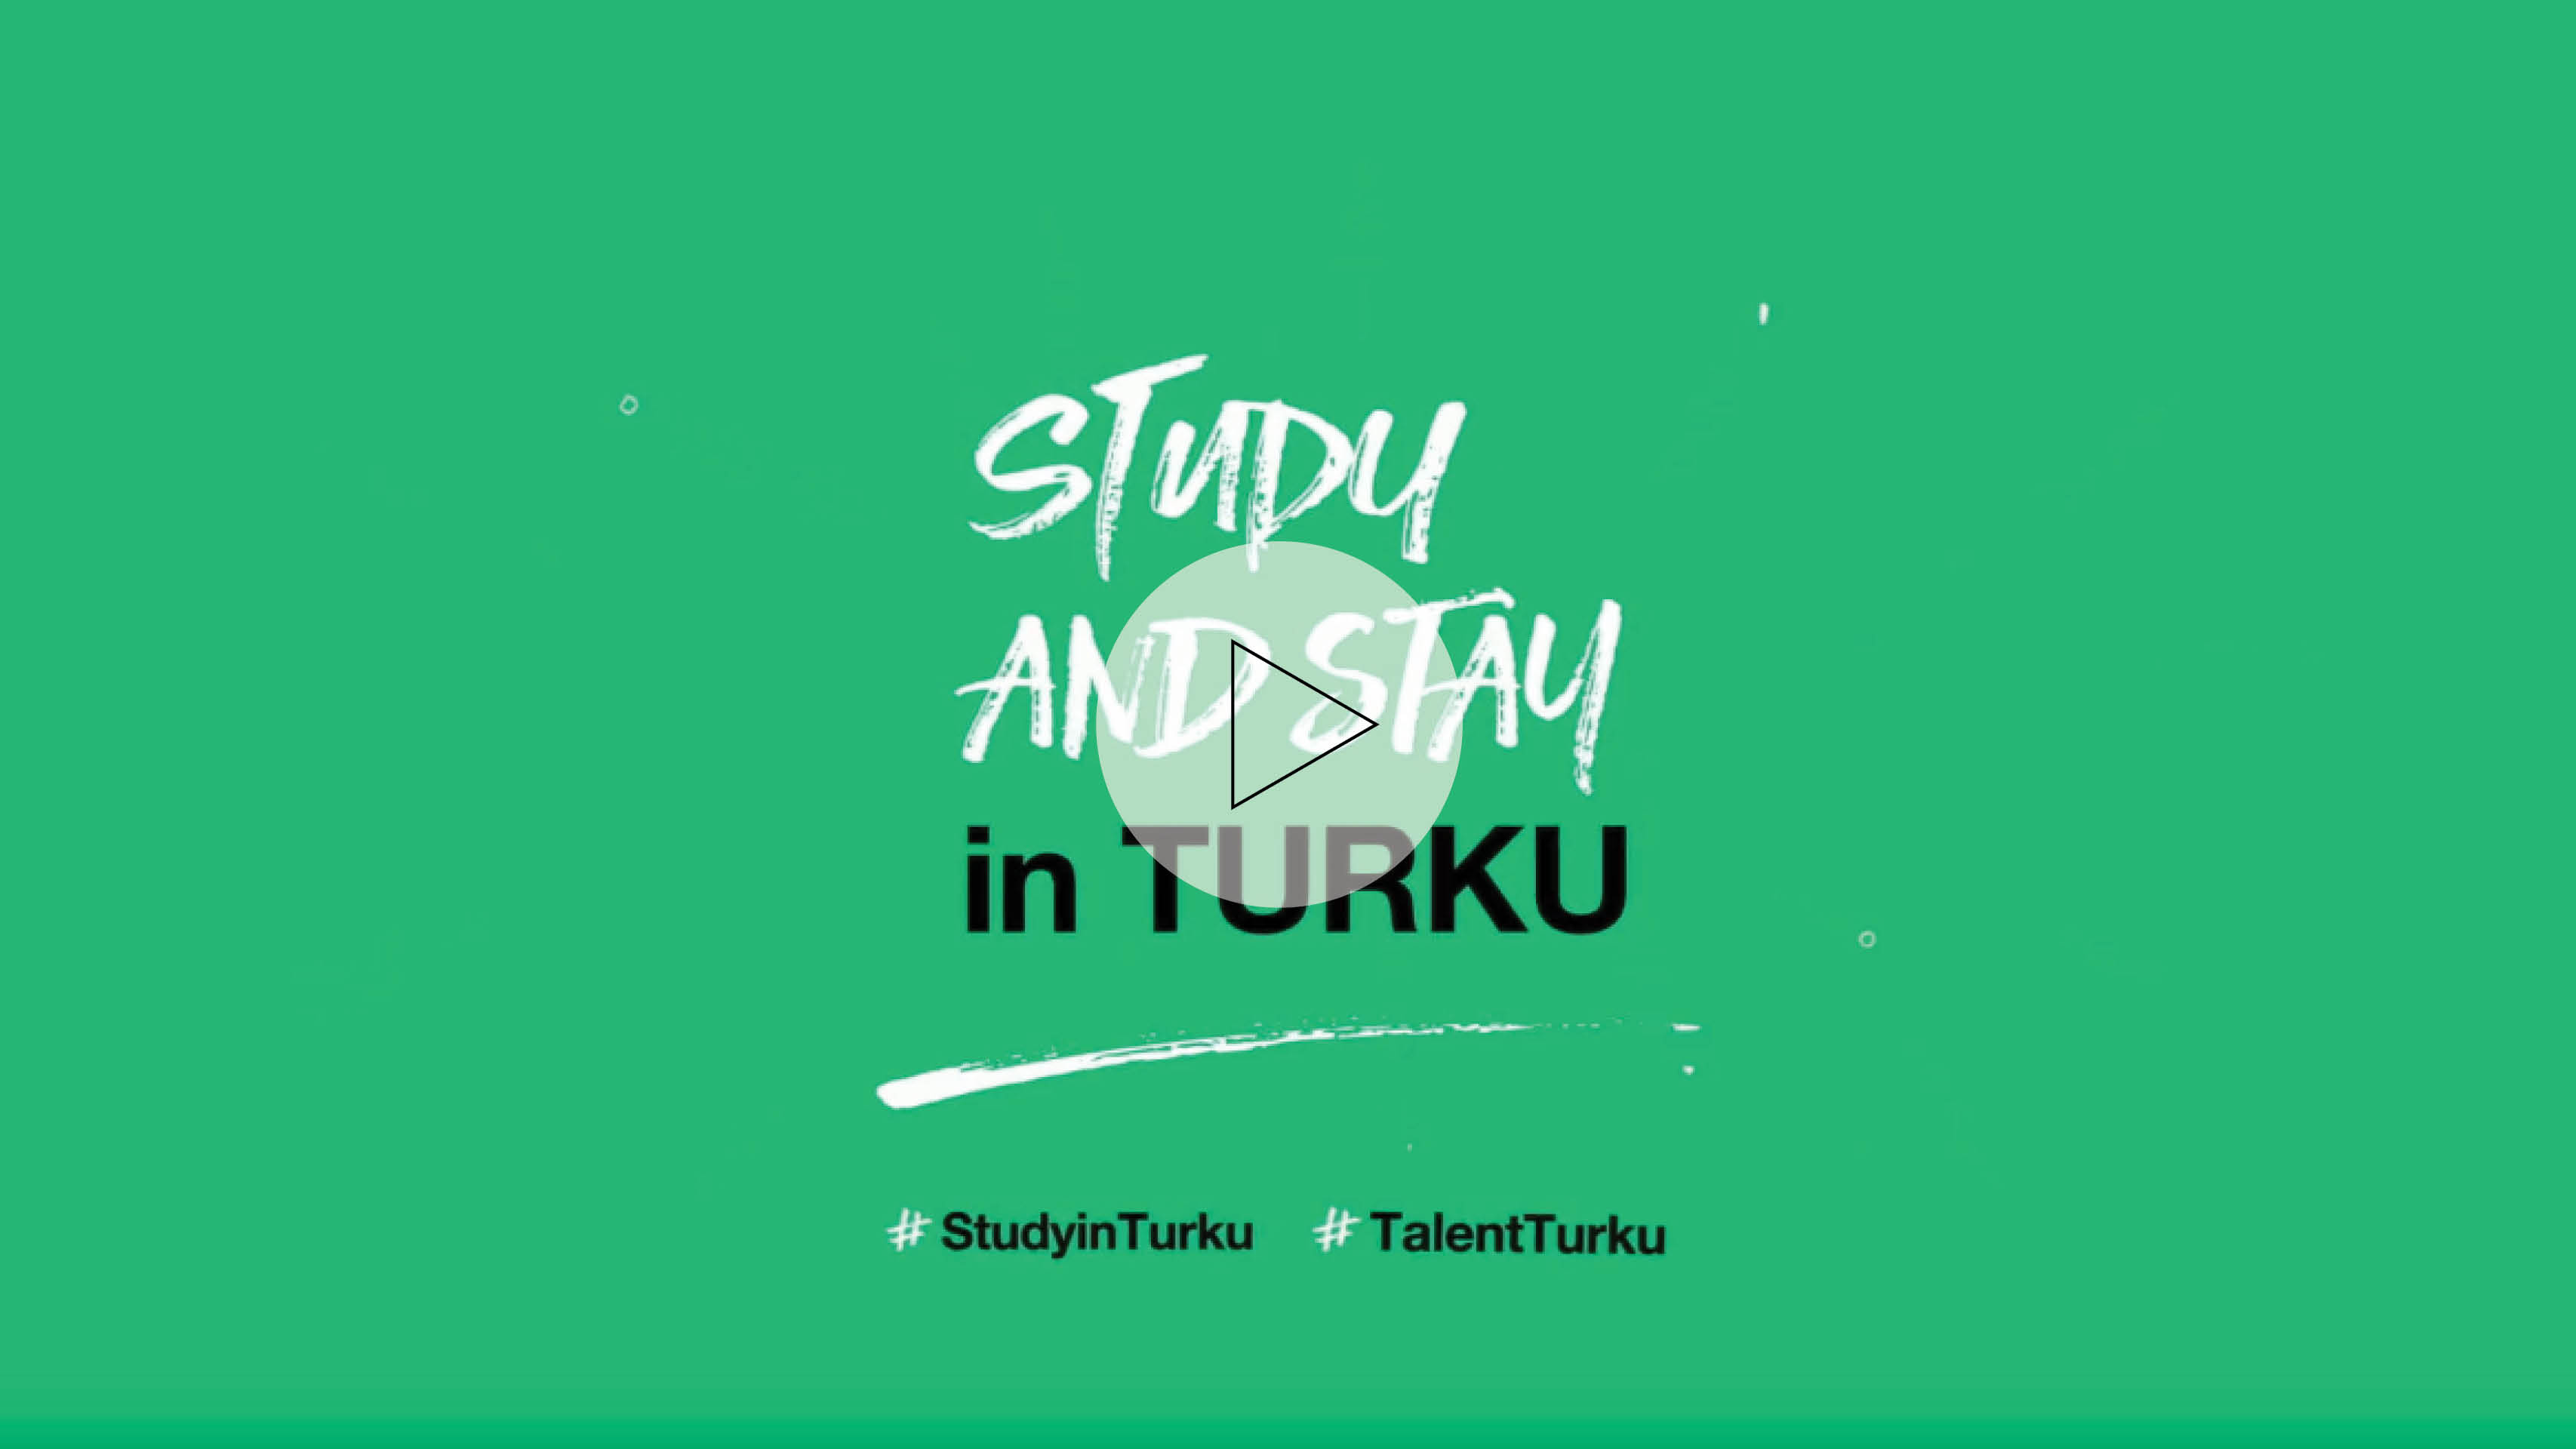 Study and Stay in Turku event recording 2021